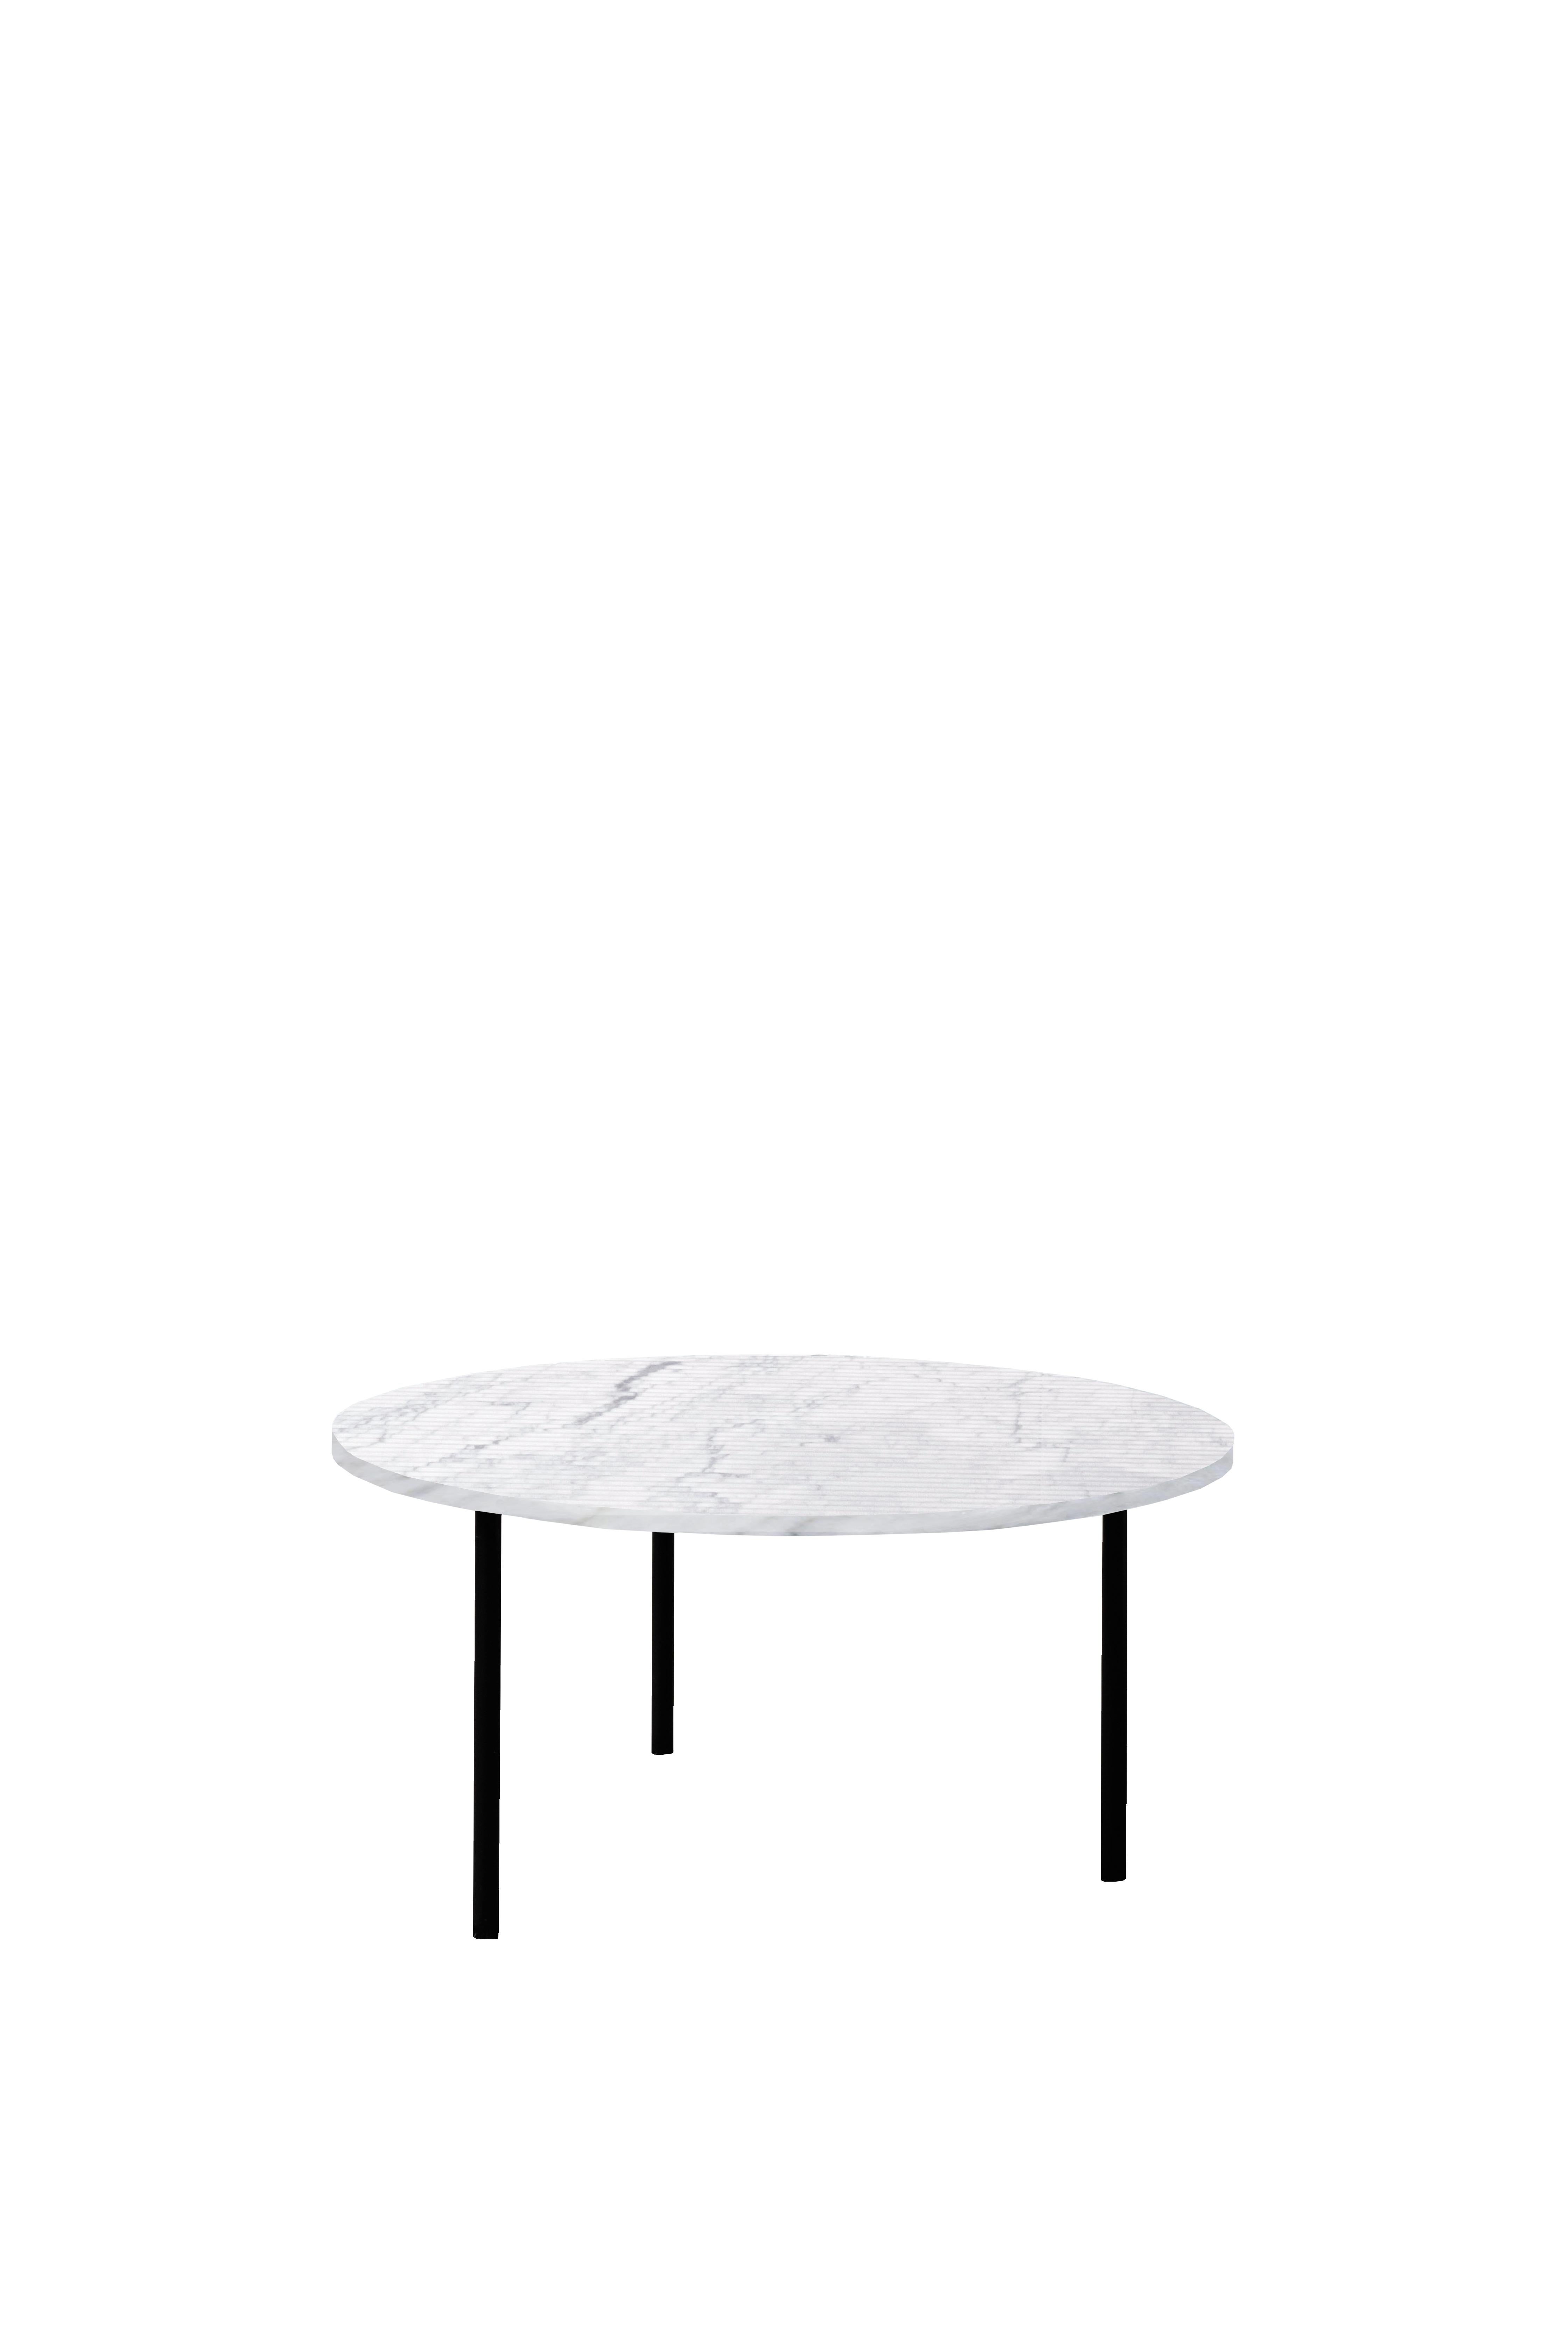 Hand-Crafted Gruff Polished Carrara Coffe Table Large For Sale